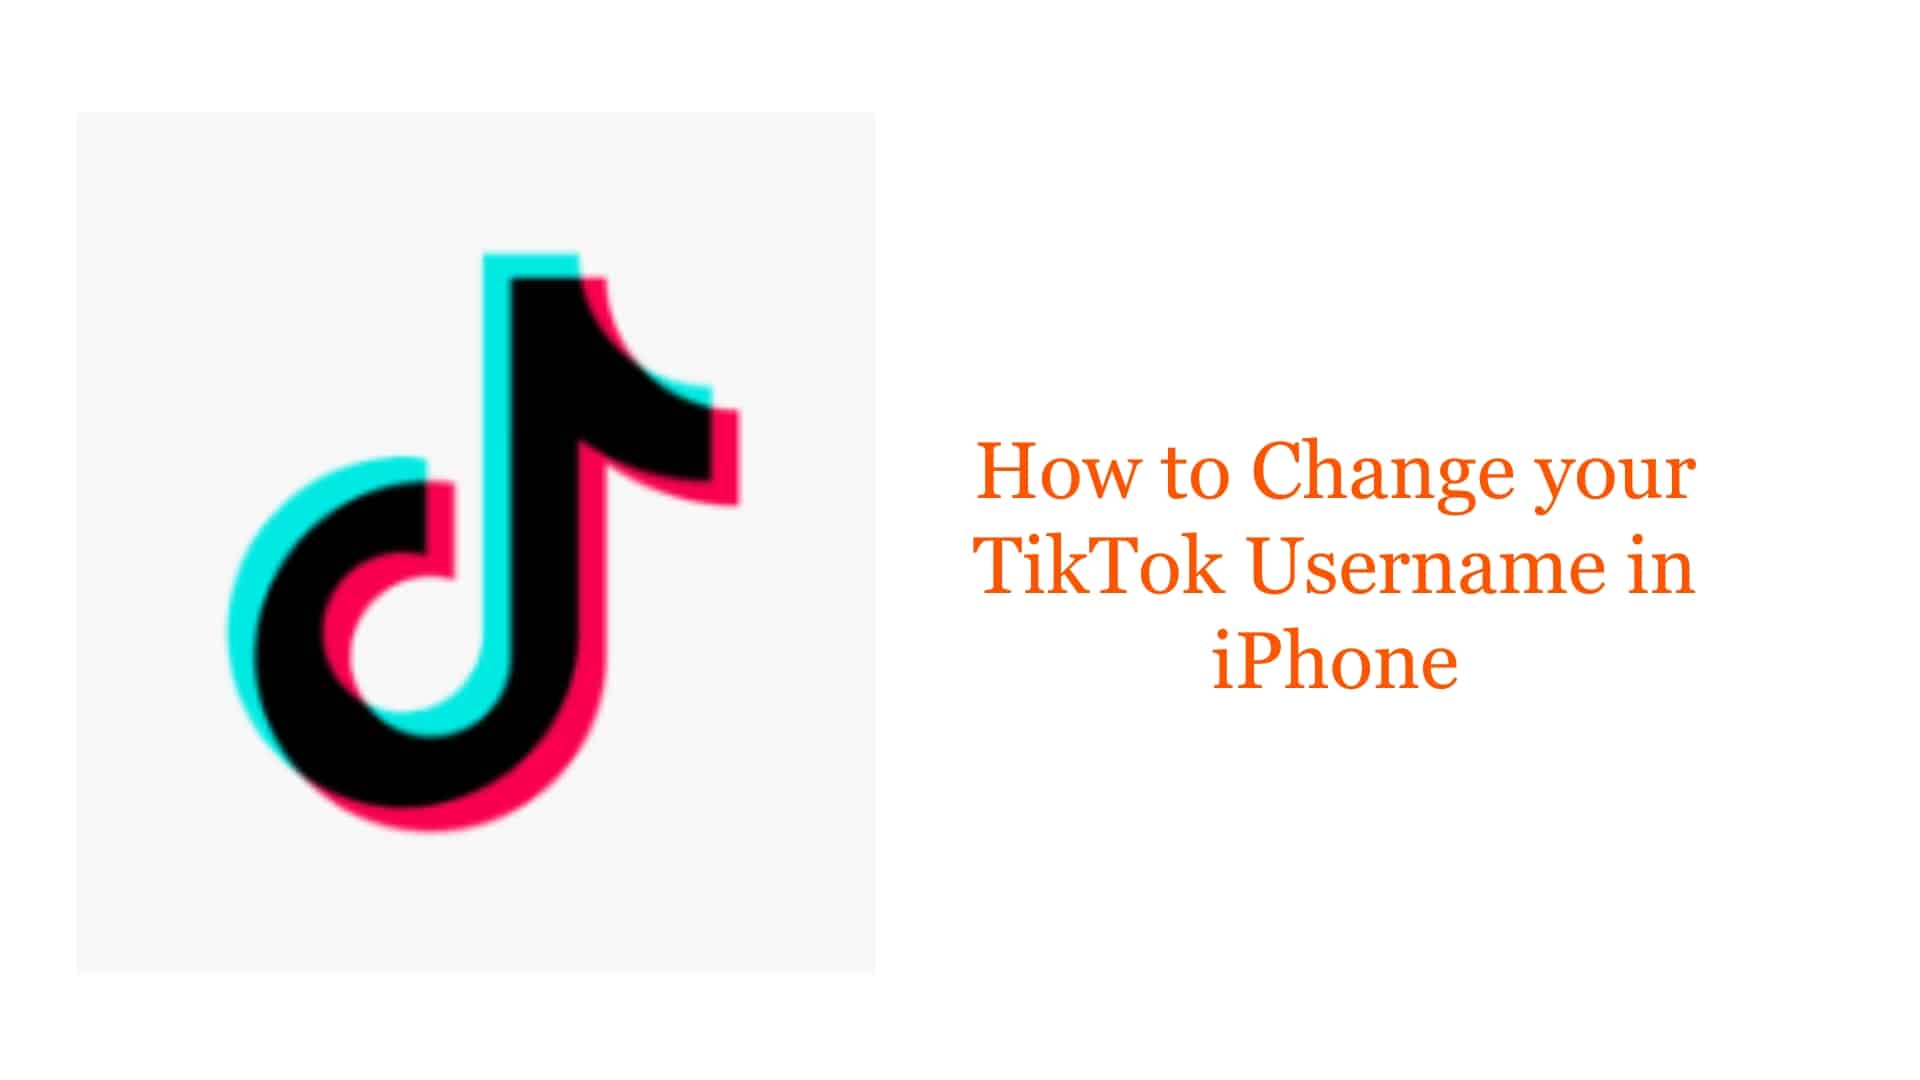 How-to-Change-your-TikTok-Username-in-iPhone - TheCellGuide